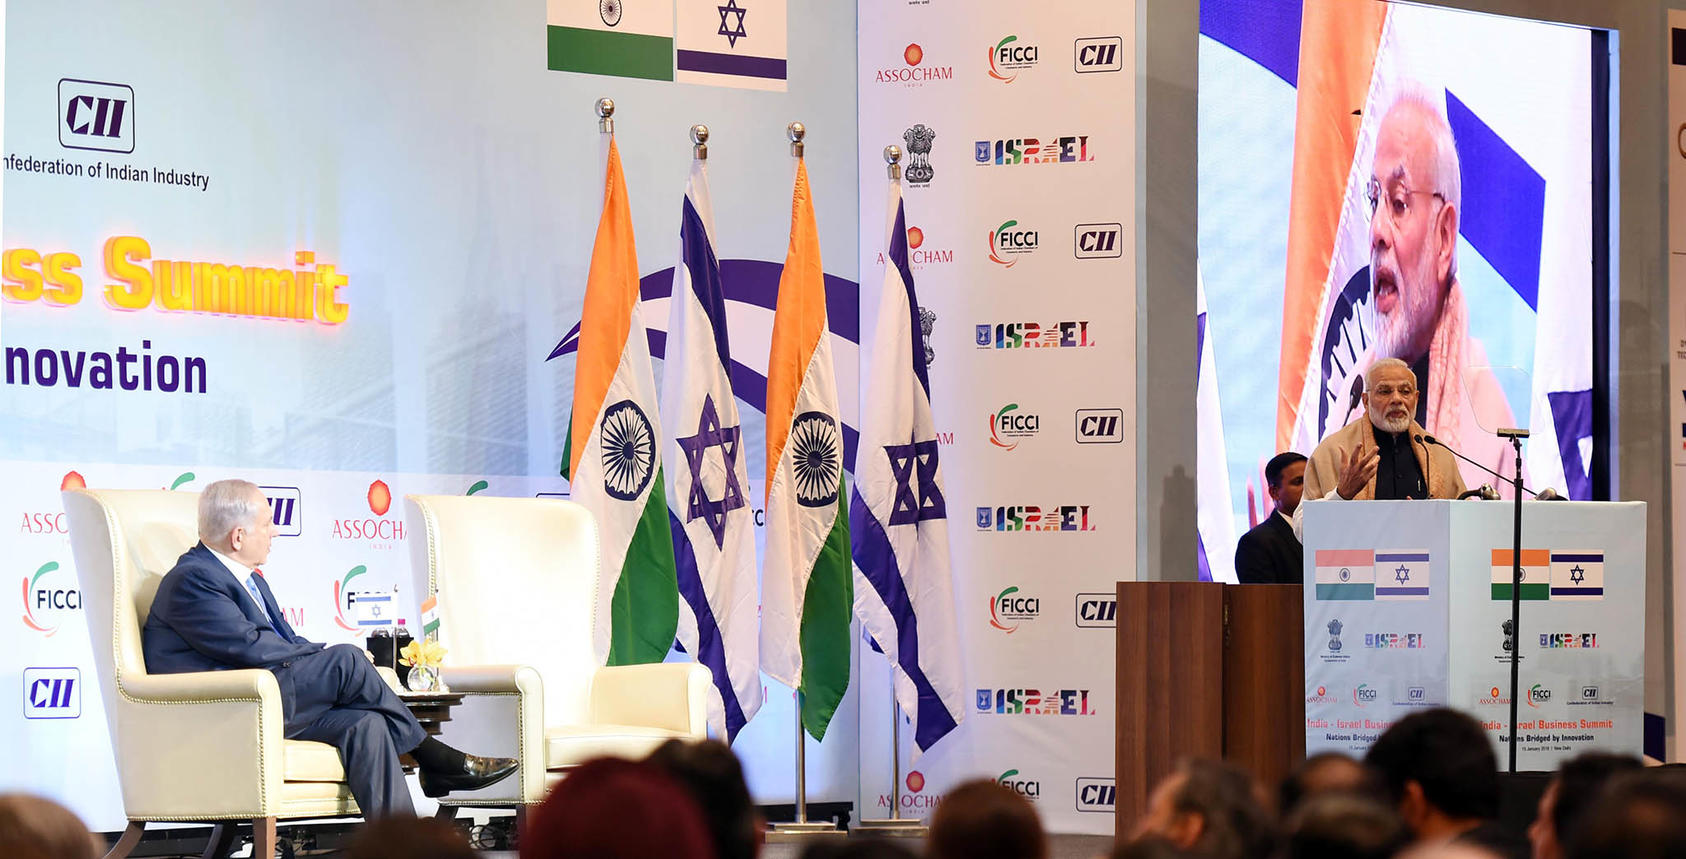 Indian Prime Minister Narendra Modi, left, and Israeli Prime Minister Benjamin Netanyahu, right, at the India-Israel Business Summit in New Delhi, Jan. 15, 2018. (Indian Ministry of External Affairs)